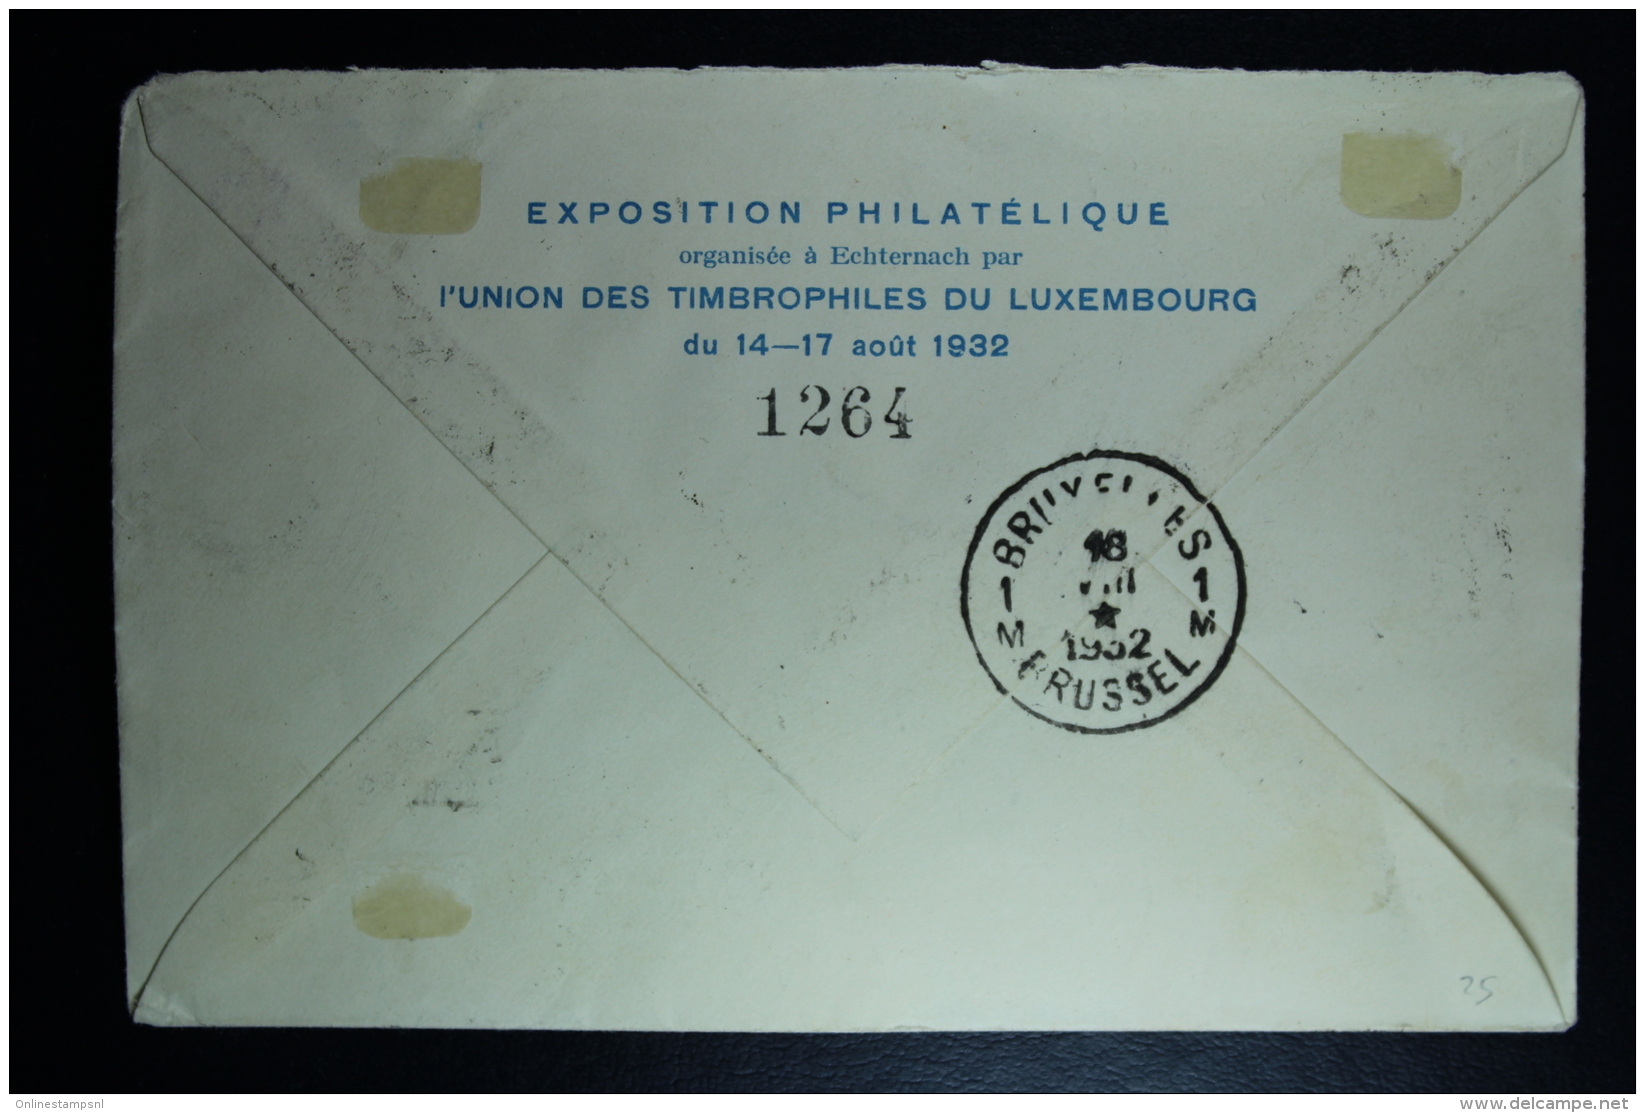 Luxembourg: Airmail Cover Echternach - Bruxelles 1932 Registered  Mi Nr 234 237  Cover Numbered - Storia Postale